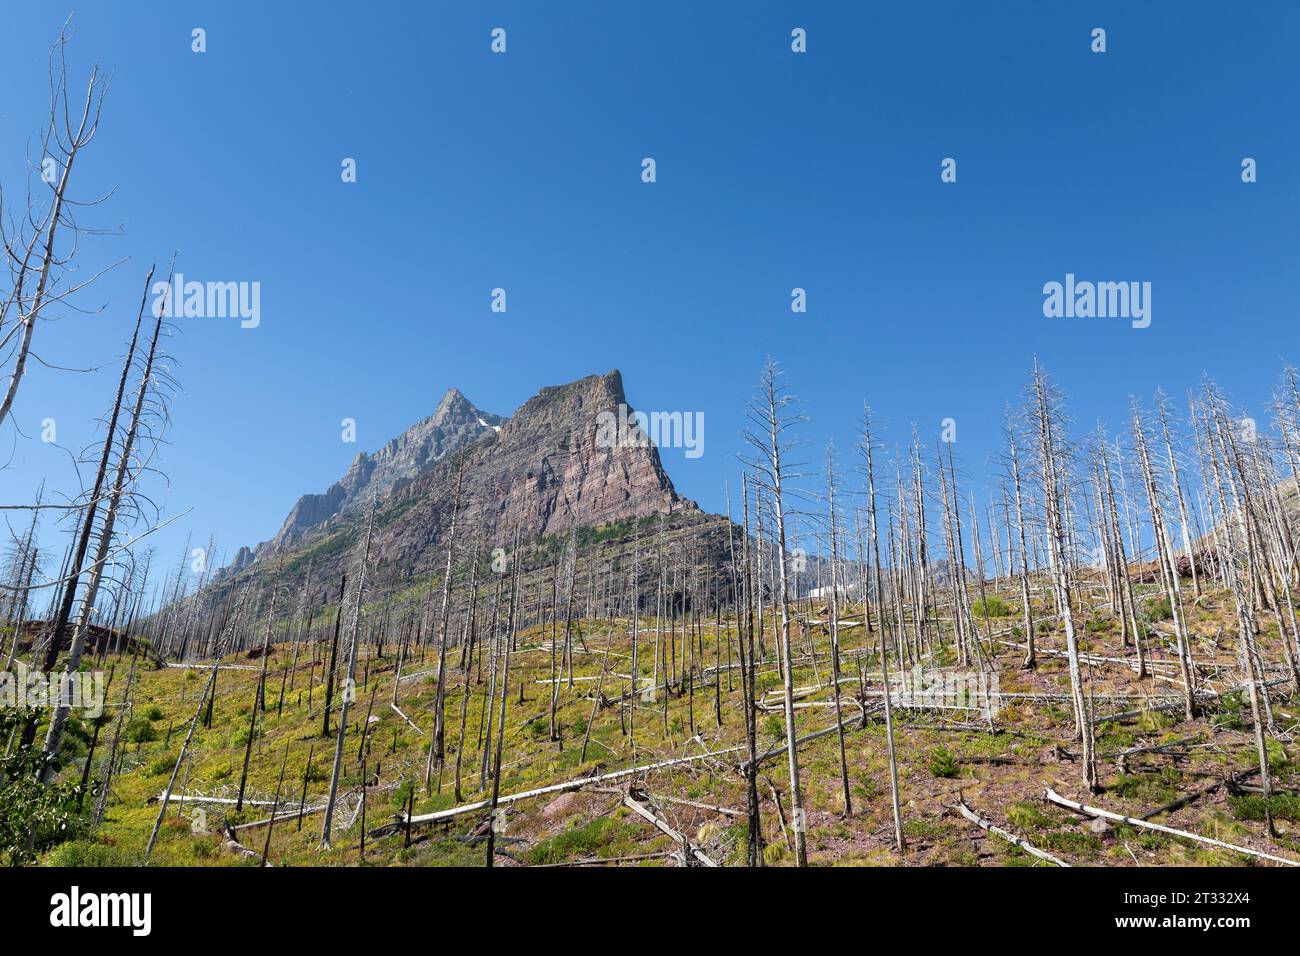 A stand of snags from a wildfire along the Going-to-the-Sun Road near Saint Mary Falls in Glacier National Park, Montana. Stock Photo